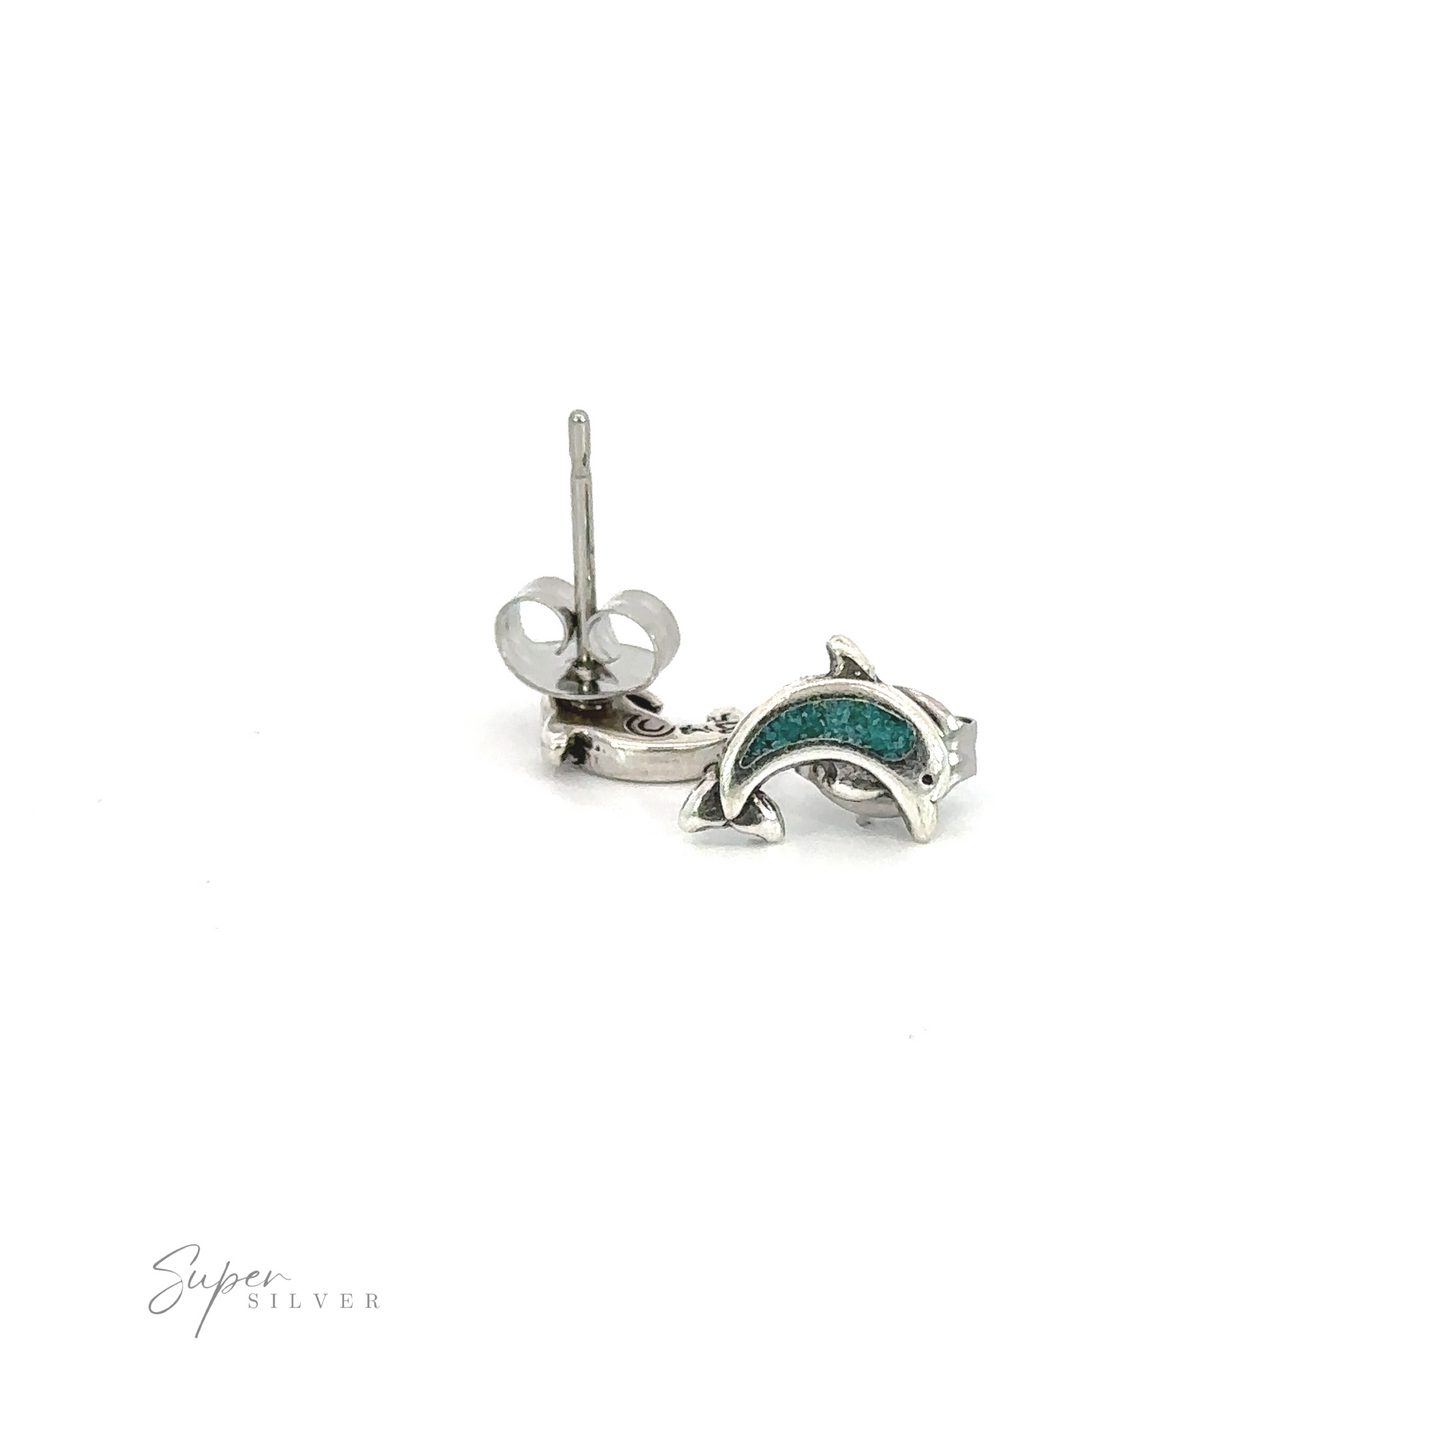 Turquoise Dolphin Studs earrings.